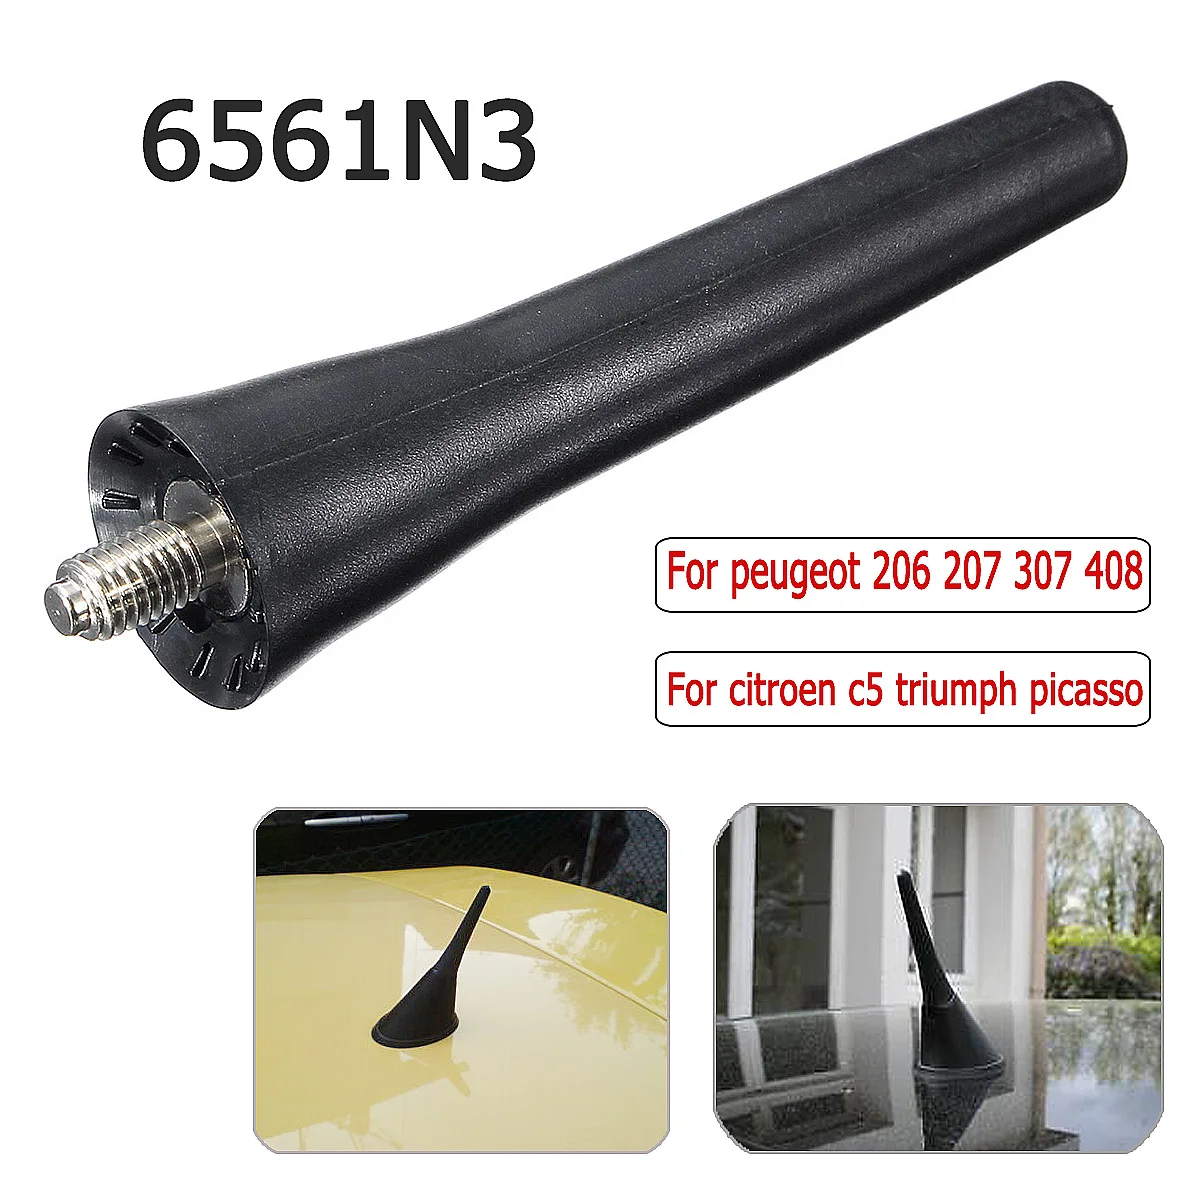 

#6561N3 Car Short Aerial Antenna Car Accessories For Peugeot 206 207 307 408 For Citroen C5 Triumph Picasso Antenna Components